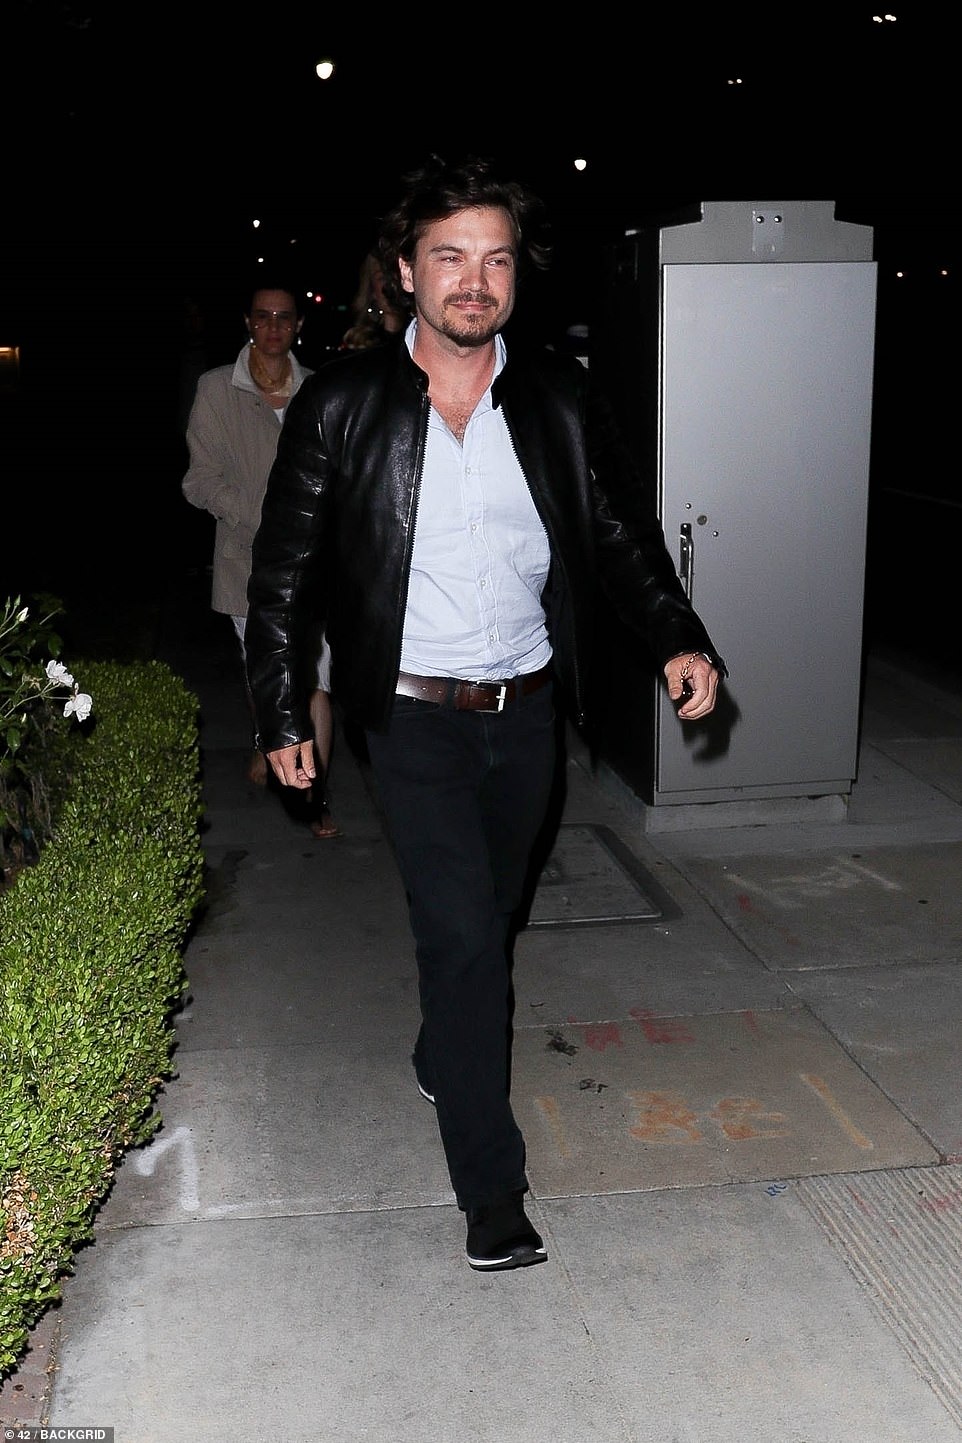 Invitee: Emile Hirsch was also there, dressed in belted black jeans, a button-up shirt, and a black leather jacket